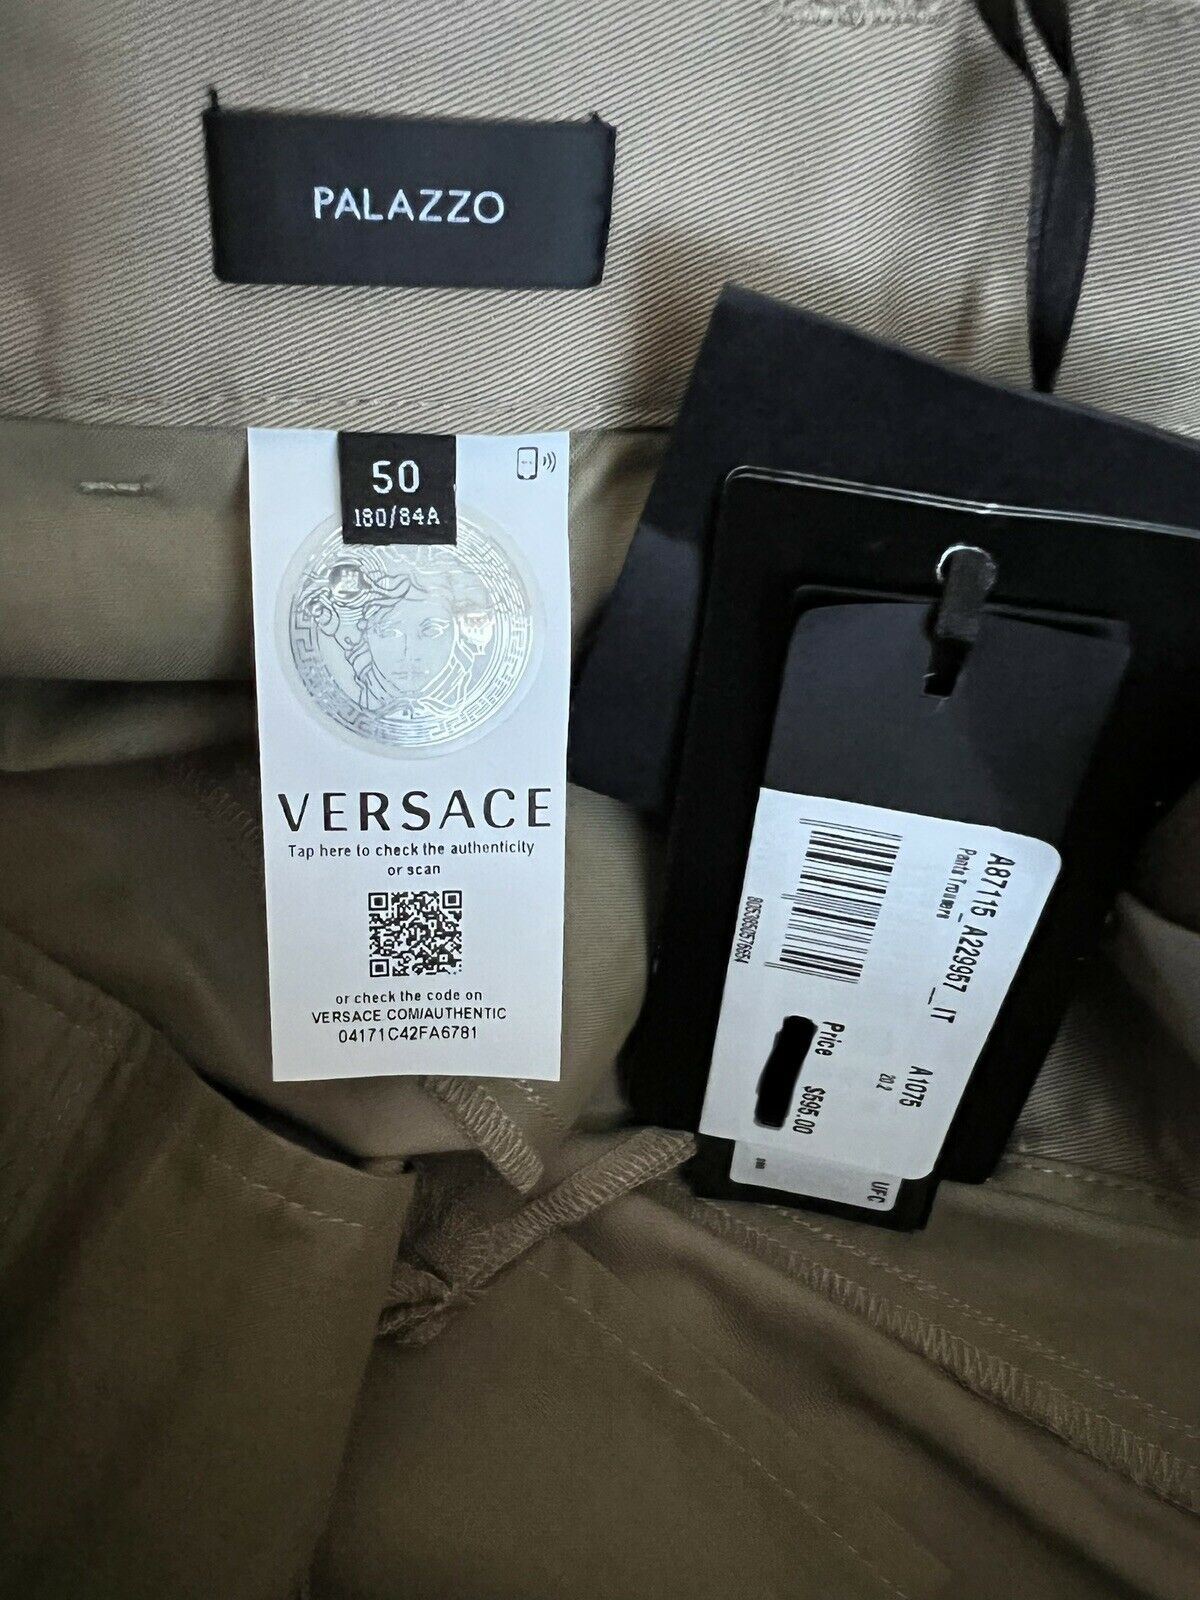 NWT $595 Versace Palazzo Men's Brown Pants 34 US (50 Euro) Made in Italy A87115